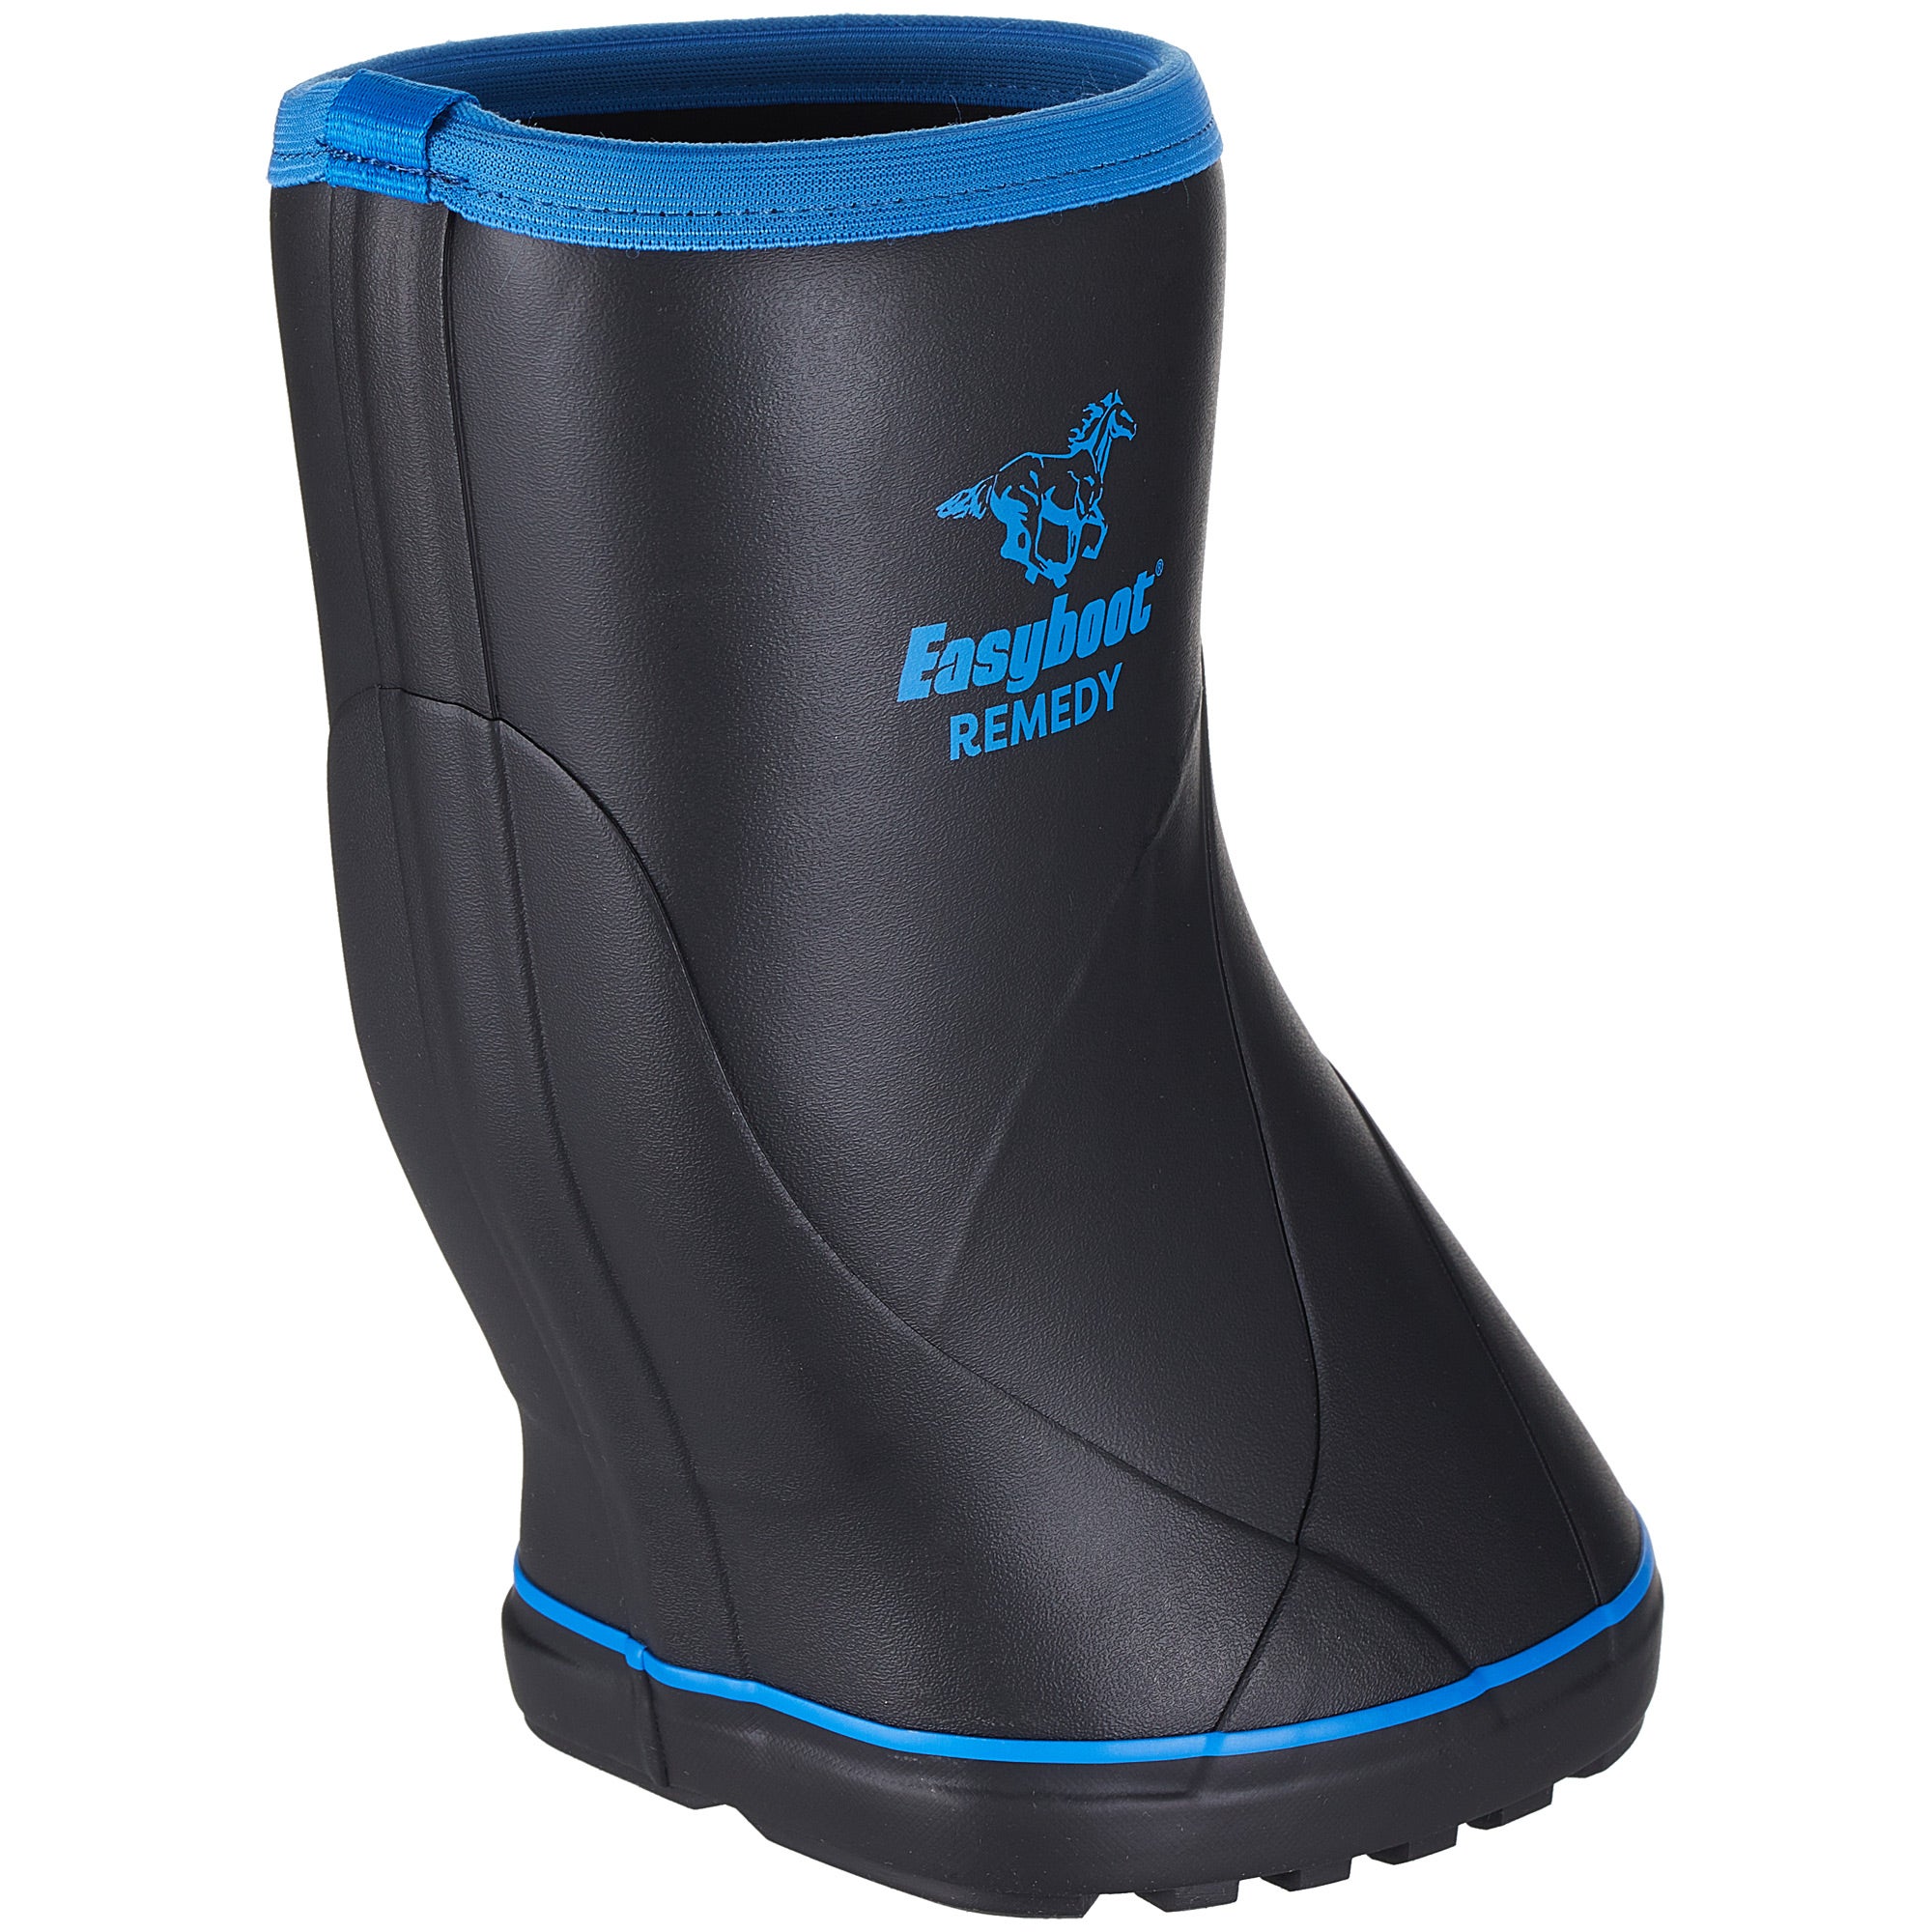 easycare rx therapy boots